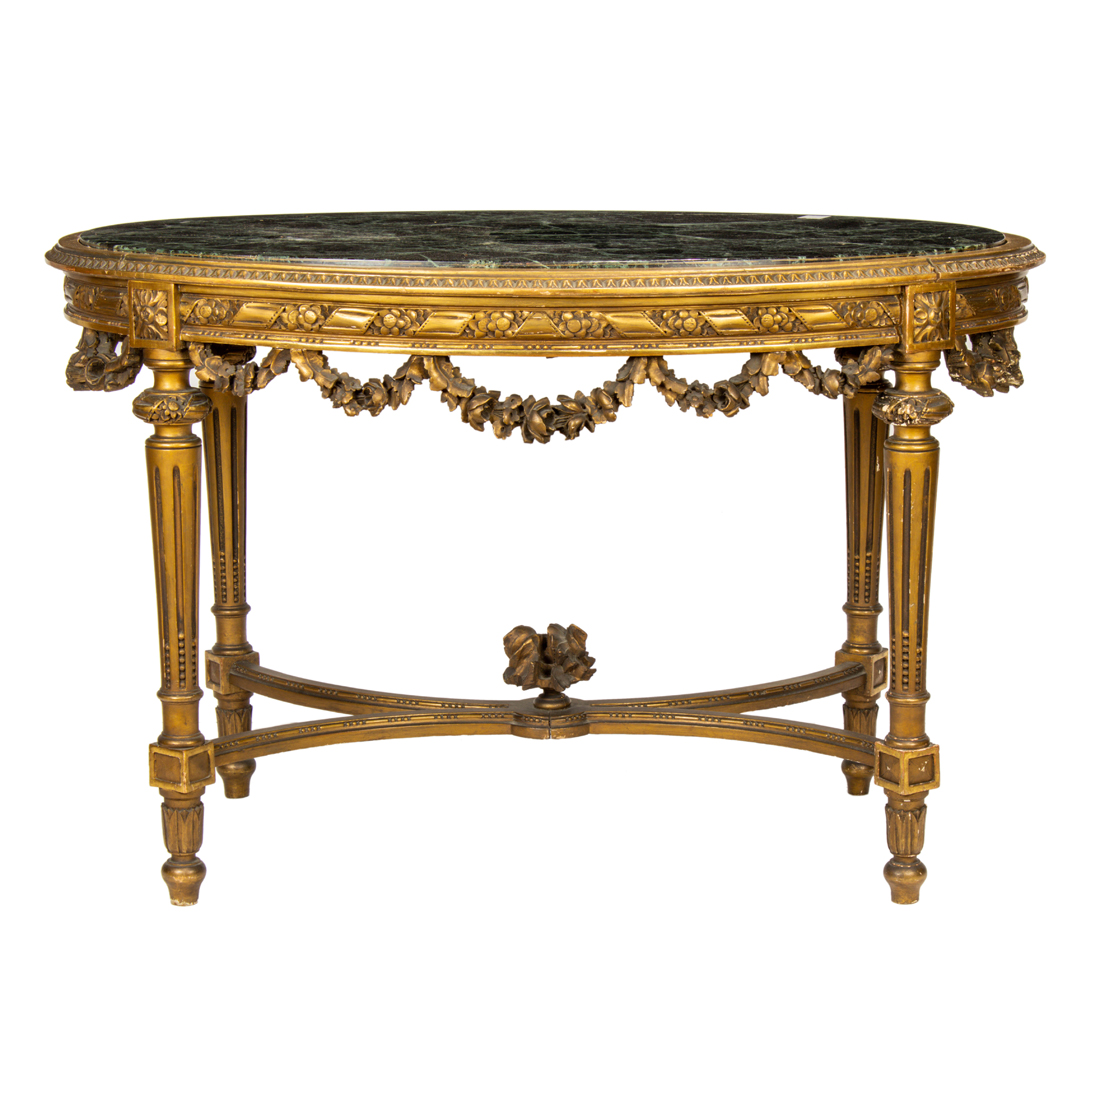 A LOUIS XVI STYLE CONSOLE TABLE